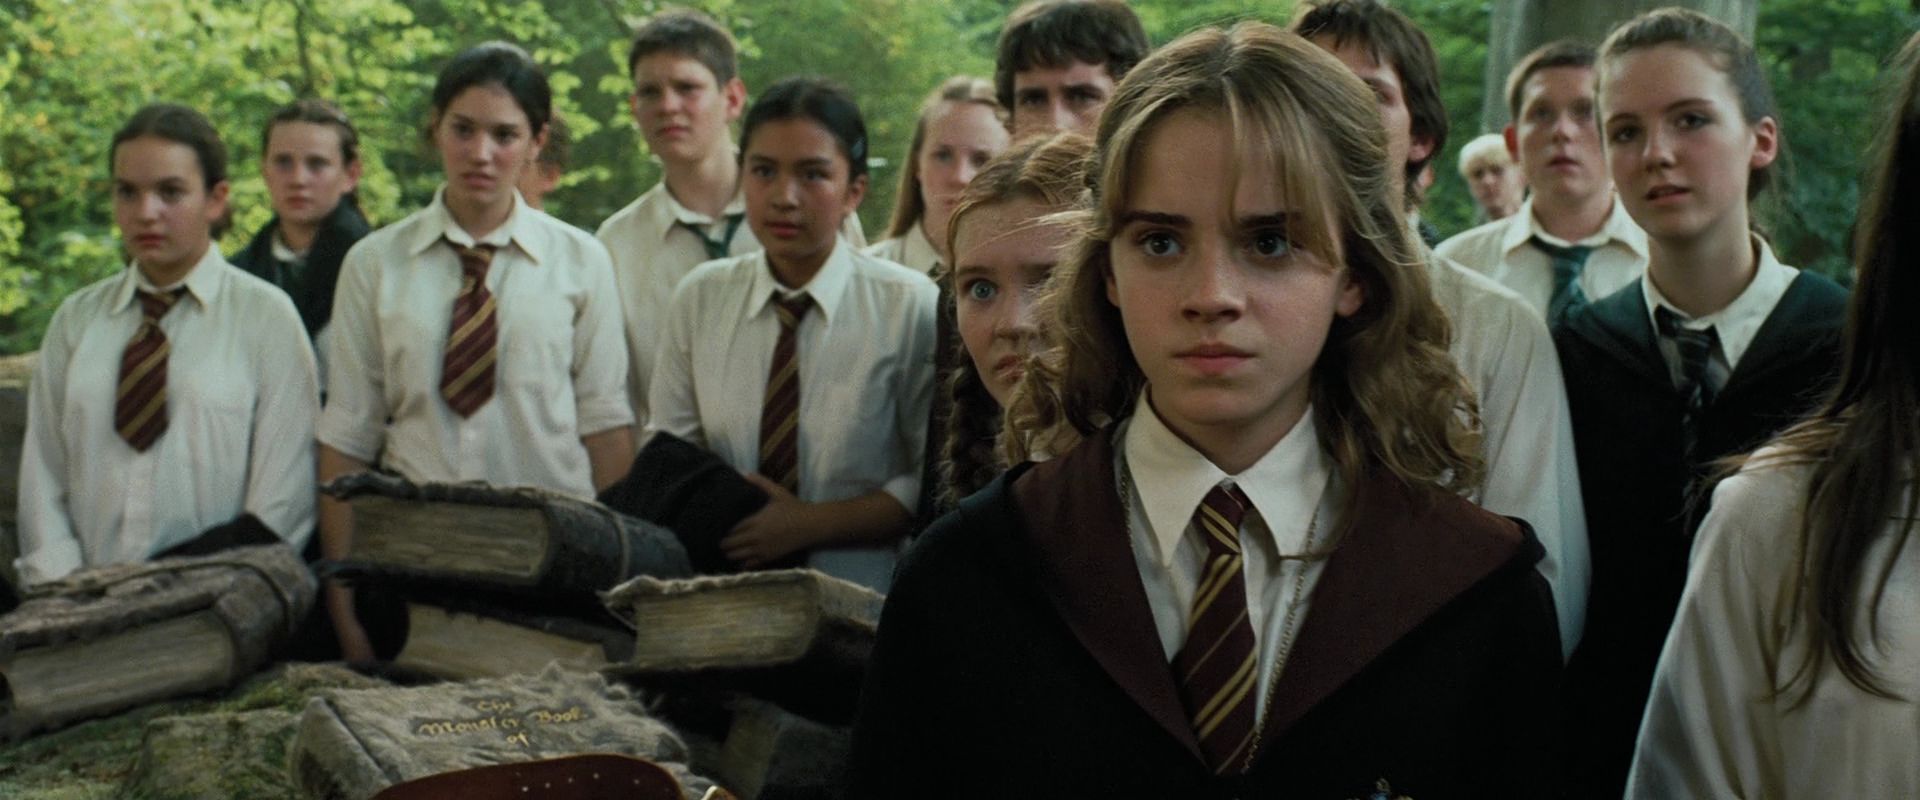 Emma As Hermione Granger In Harry Potter And The Prisoner Of